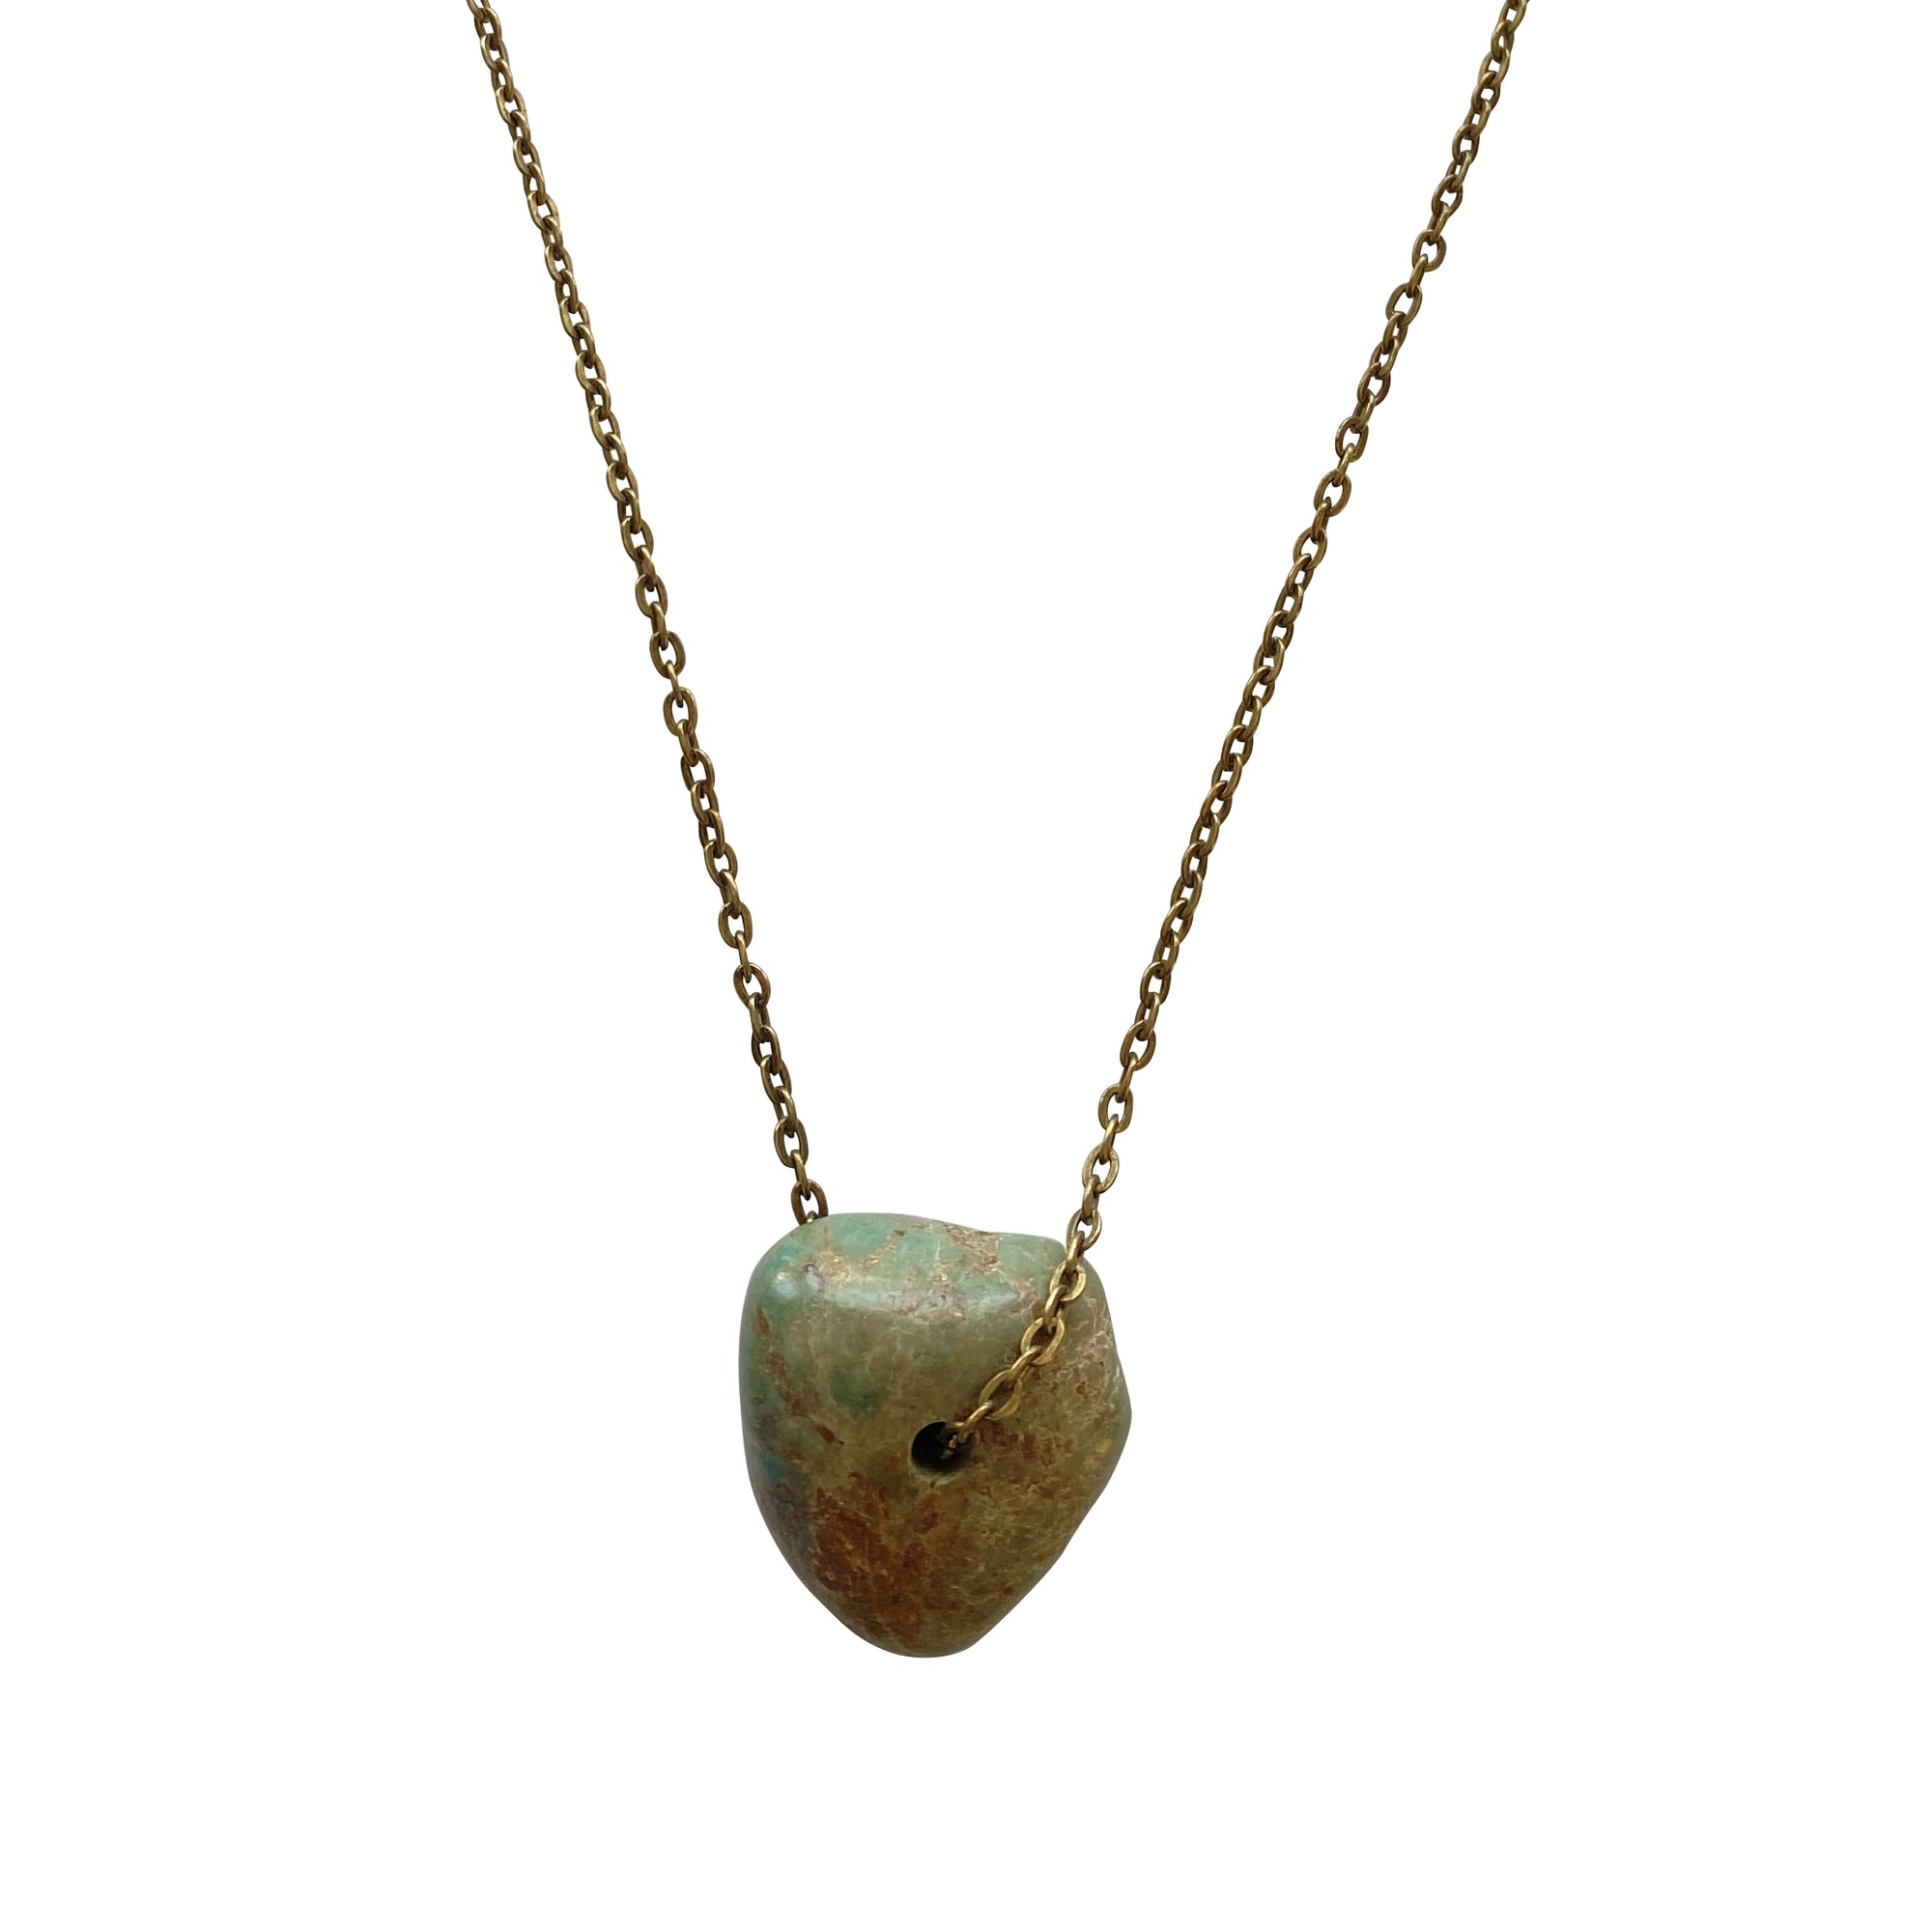 Jamie2 Turquoise Pendant Necklace with Antique Brass Chain